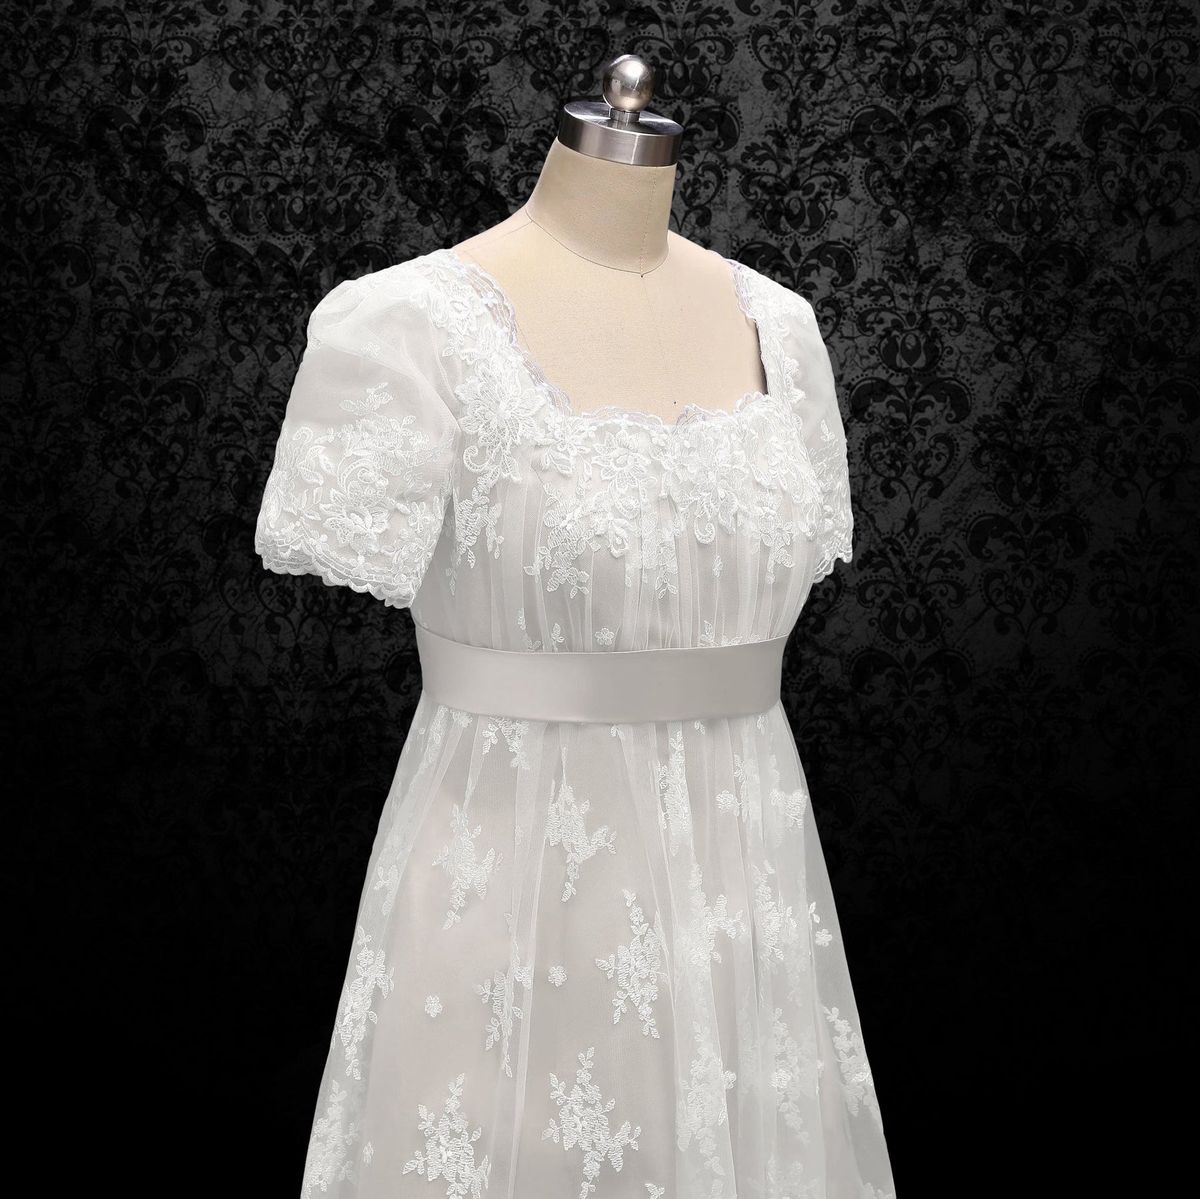 Wonderland By Lilian Plus Size 18 Prom Lace White A-line Dress on Queenly